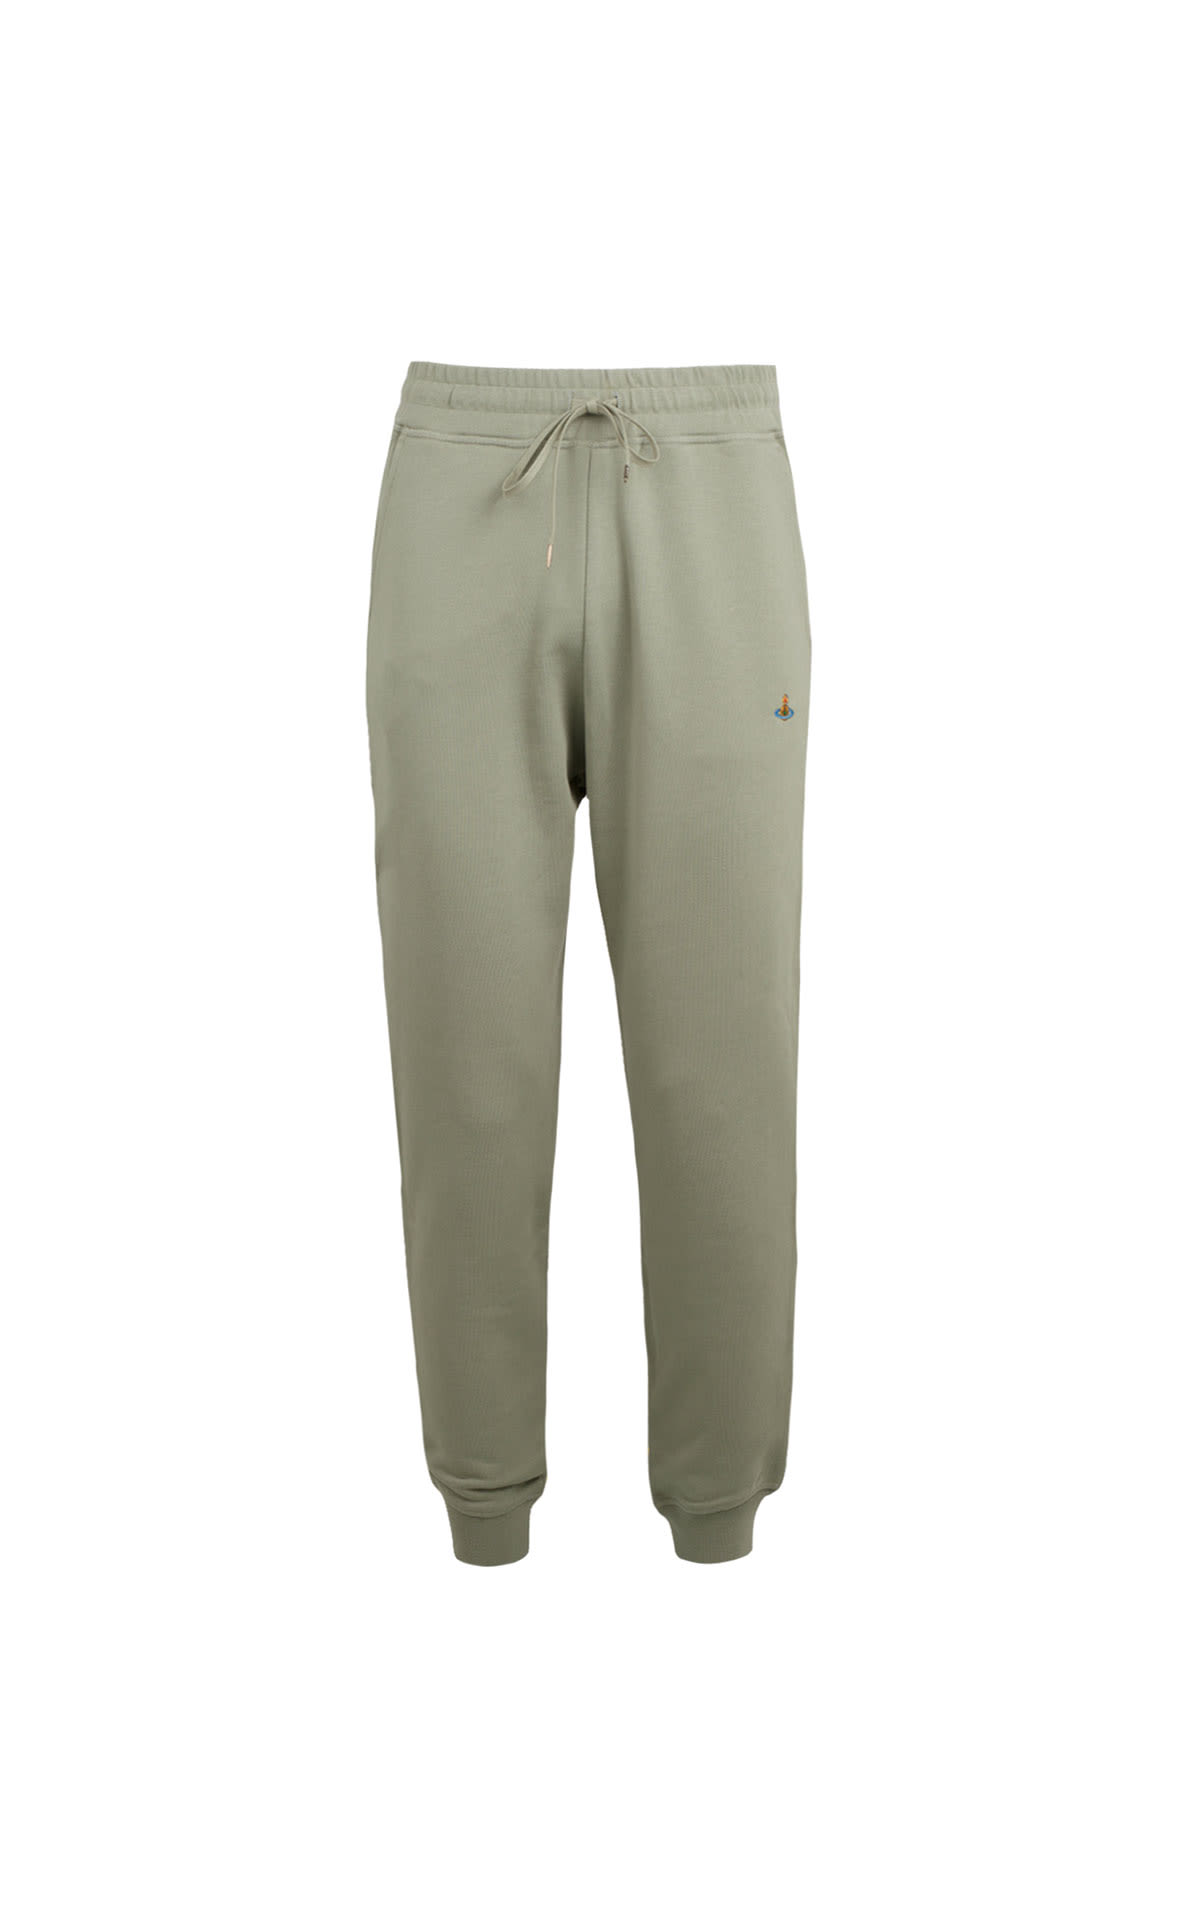 Vivienne Westwood Classic sweatpants from Bicester Village